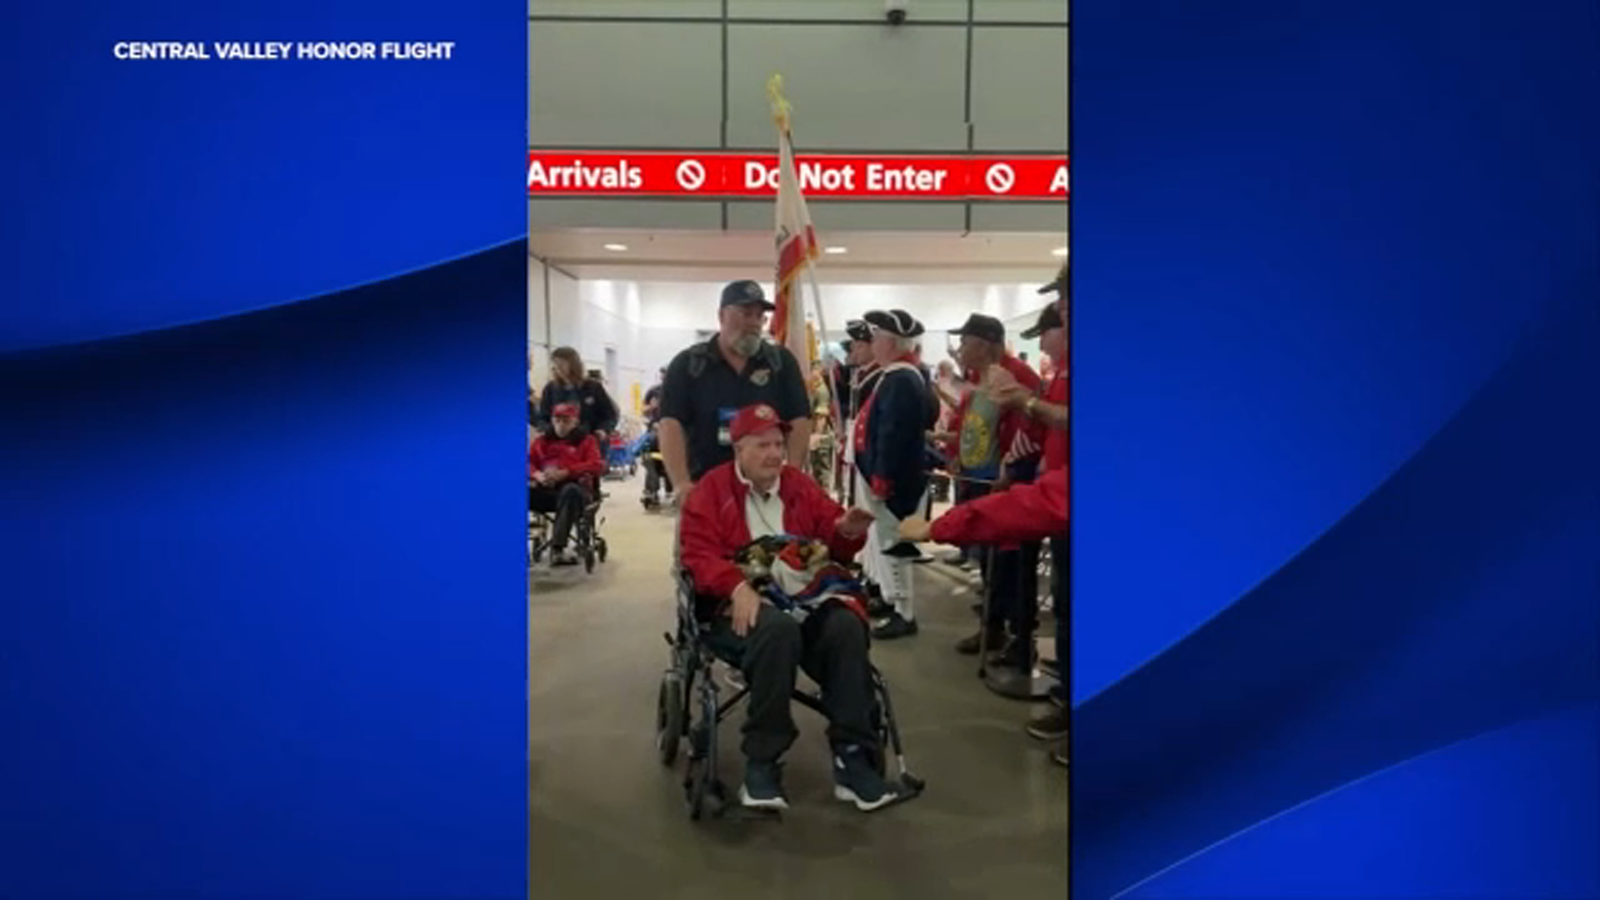 veterans-arrive-home-to-hero’s-welcome-after-central-valley-honor-flight